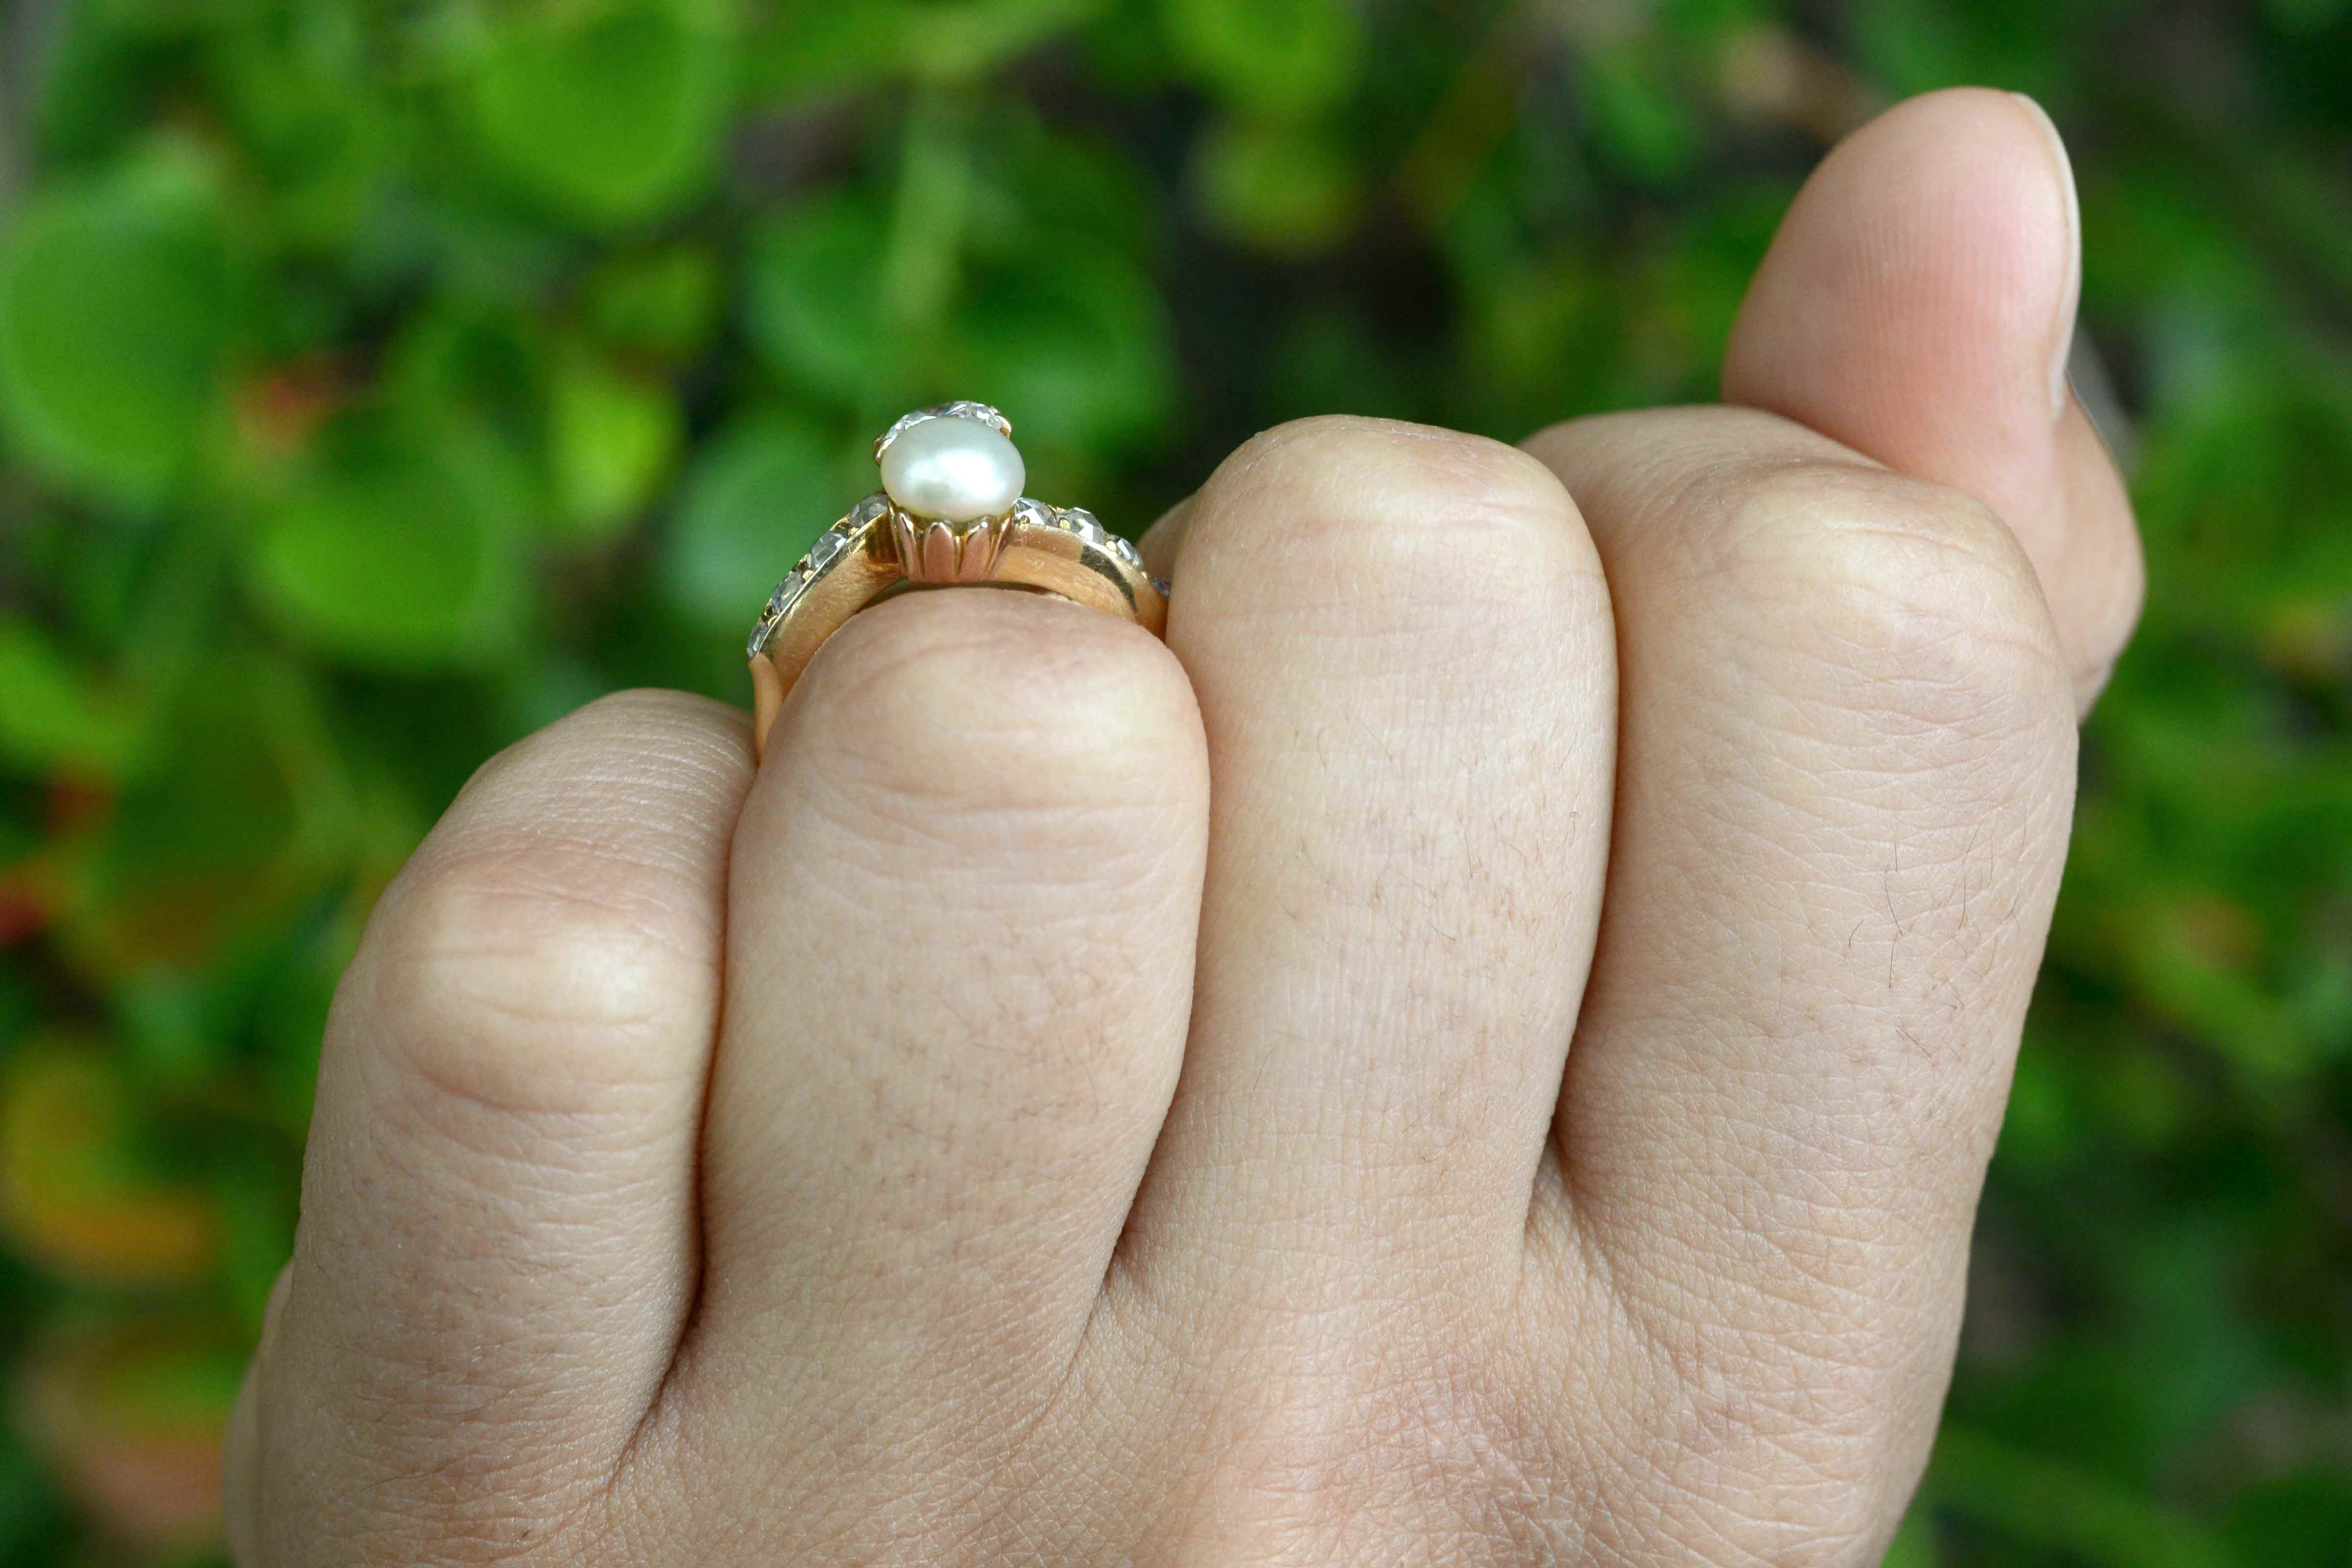 This gold solitaire ring features a pearl and diamonds.